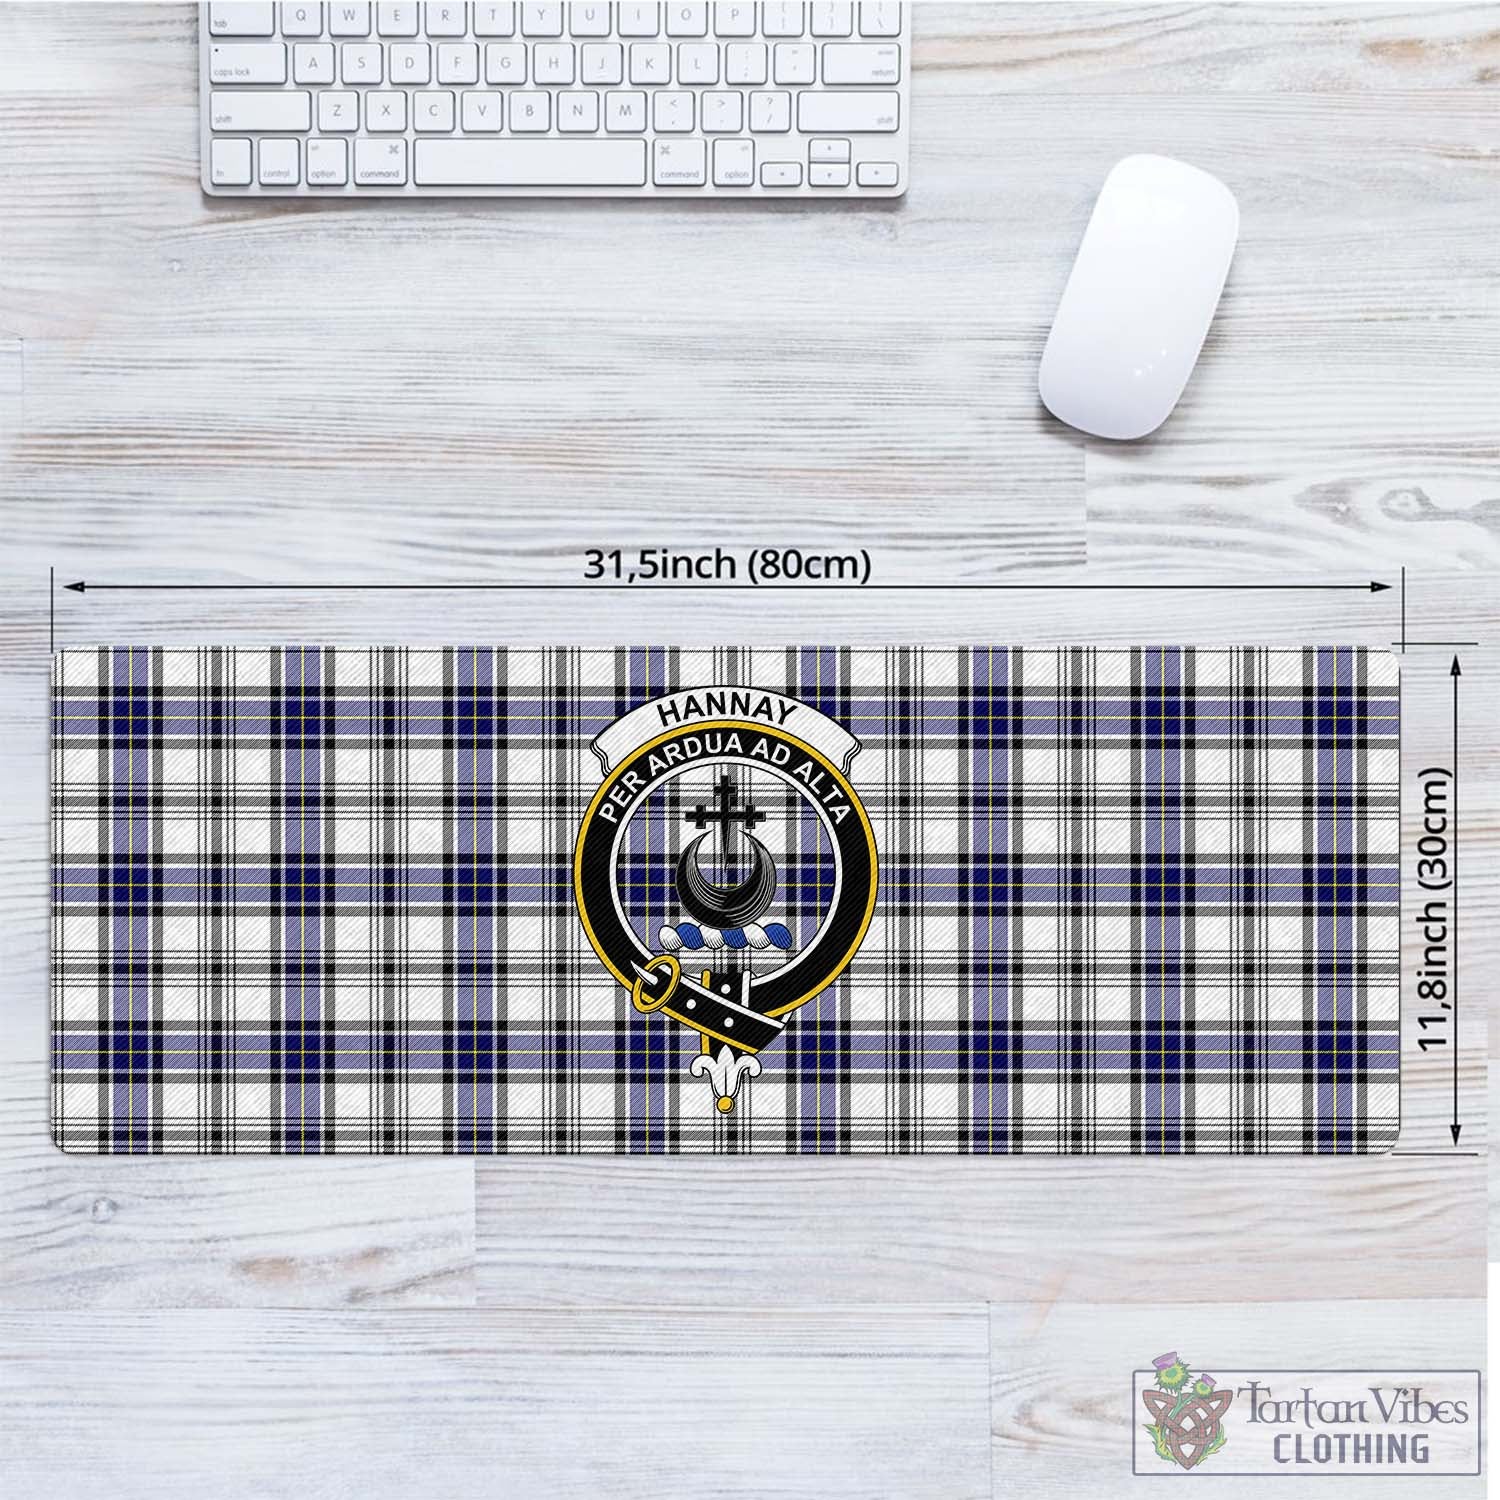 Tartan Vibes Clothing Hannay Modern Tartan Mouse Pad with Family Crest